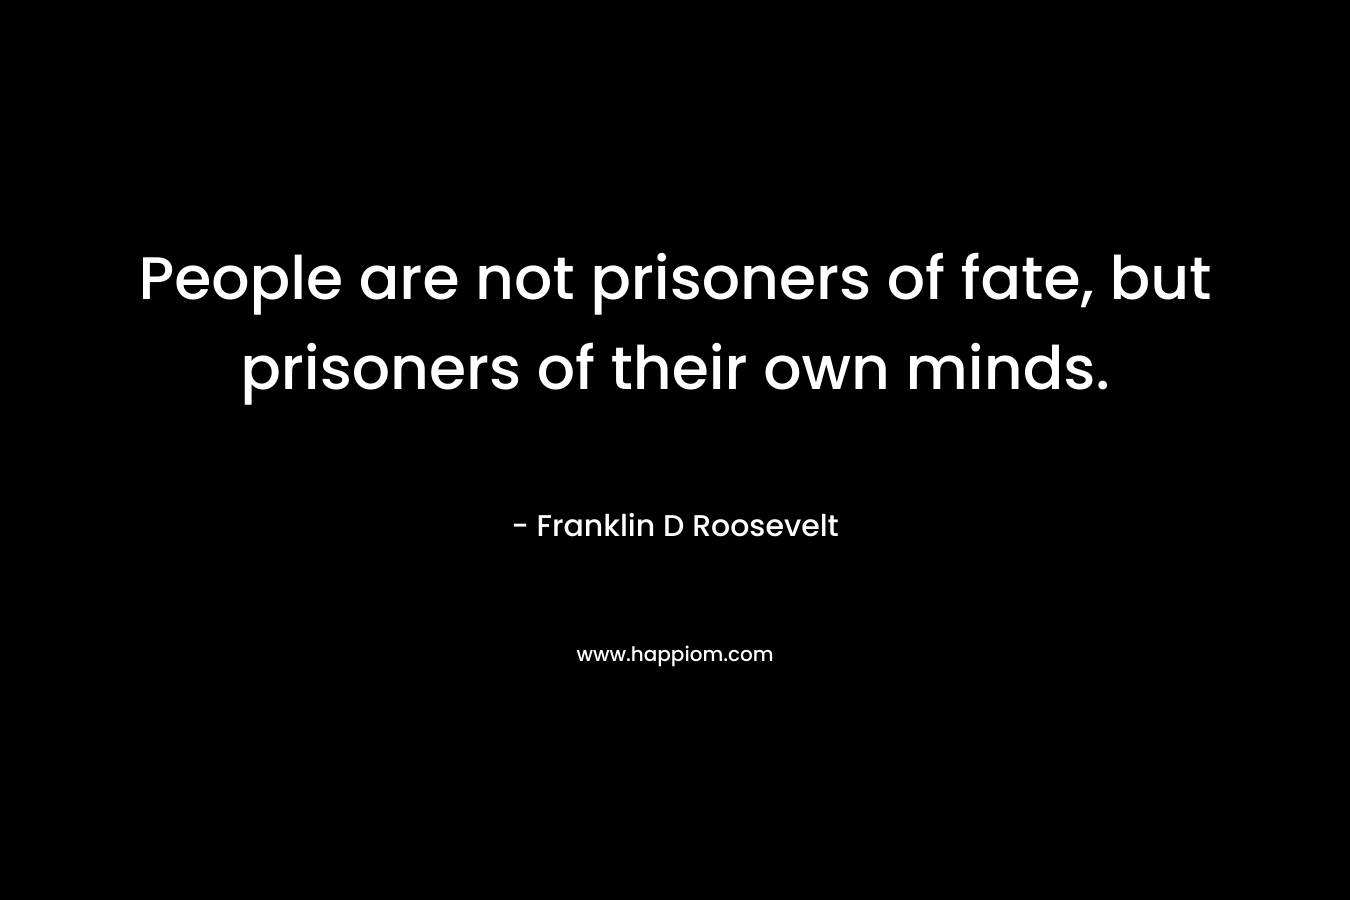 People are not prisoners of fate, but prisoners of their own minds. – Franklin D Roosevelt